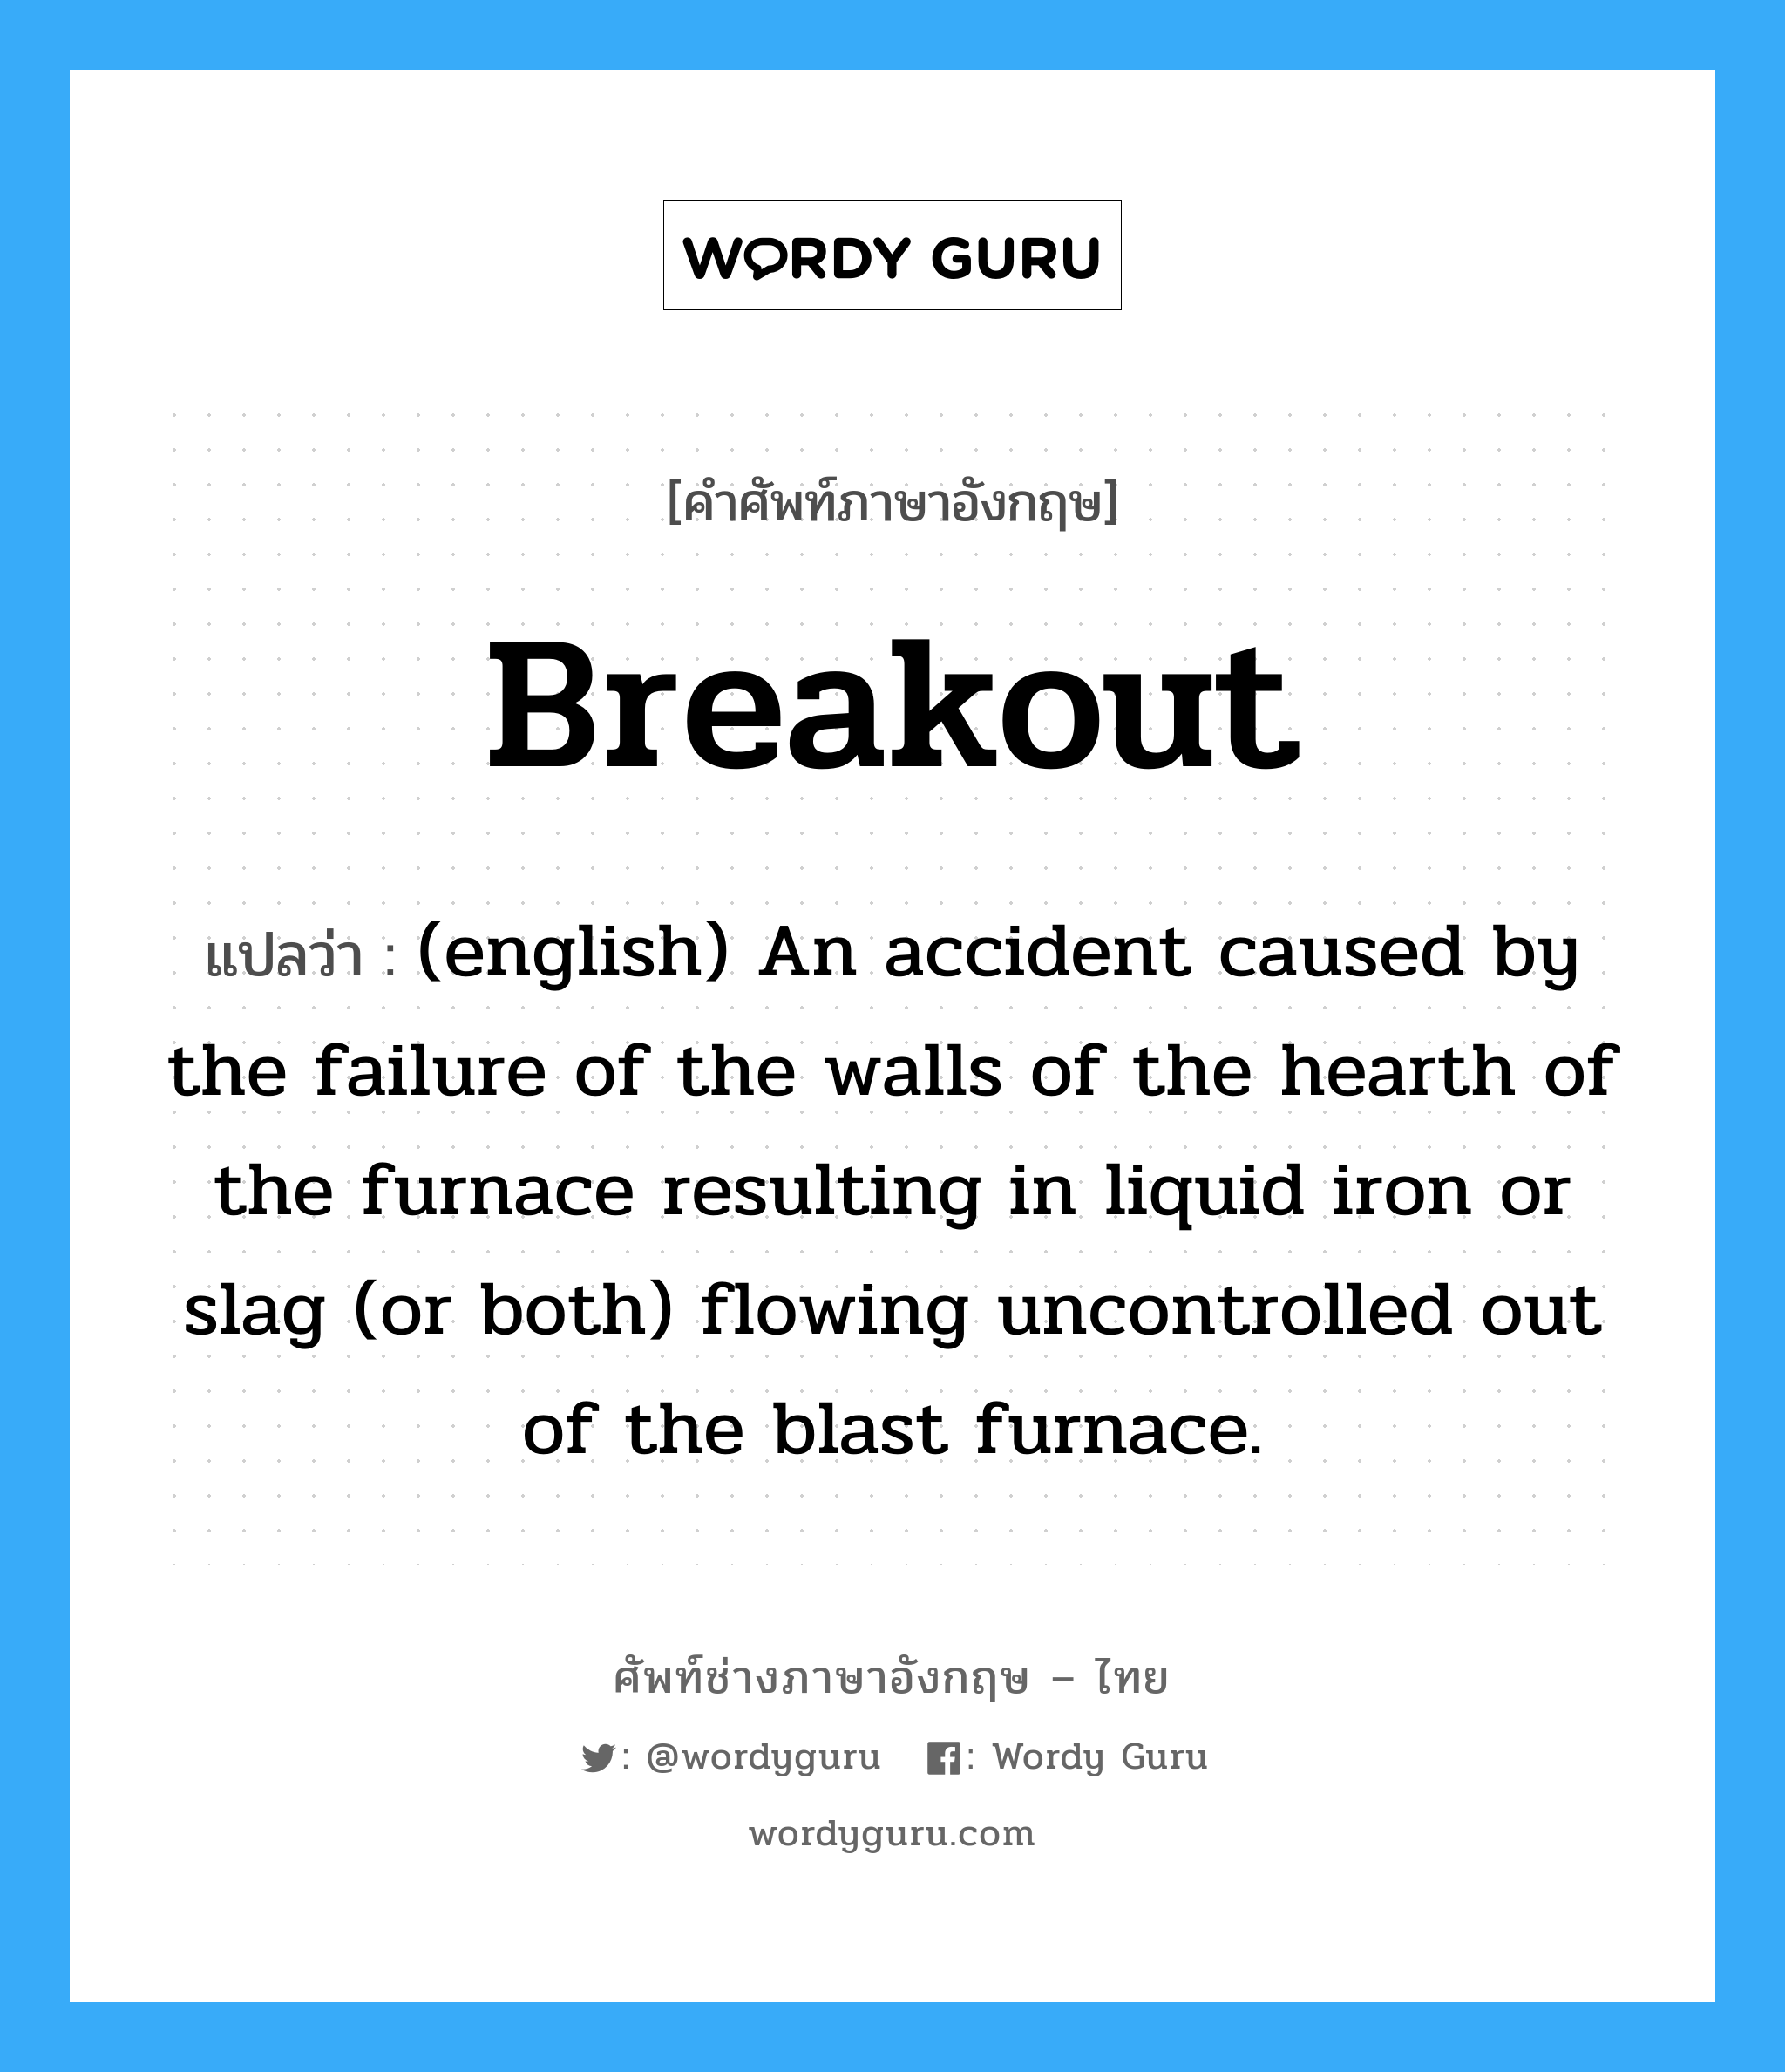 Breakout แปลว่า?, คำศัพท์ช่างภาษาอังกฤษ - ไทย Breakout คำศัพท์ภาษาอังกฤษ Breakout แปลว่า (english) An accident caused by the failure of the walls of the hearth of the furnace resulting in liquid iron or slag (or both) flowing uncontrolled out of the blast furnace.